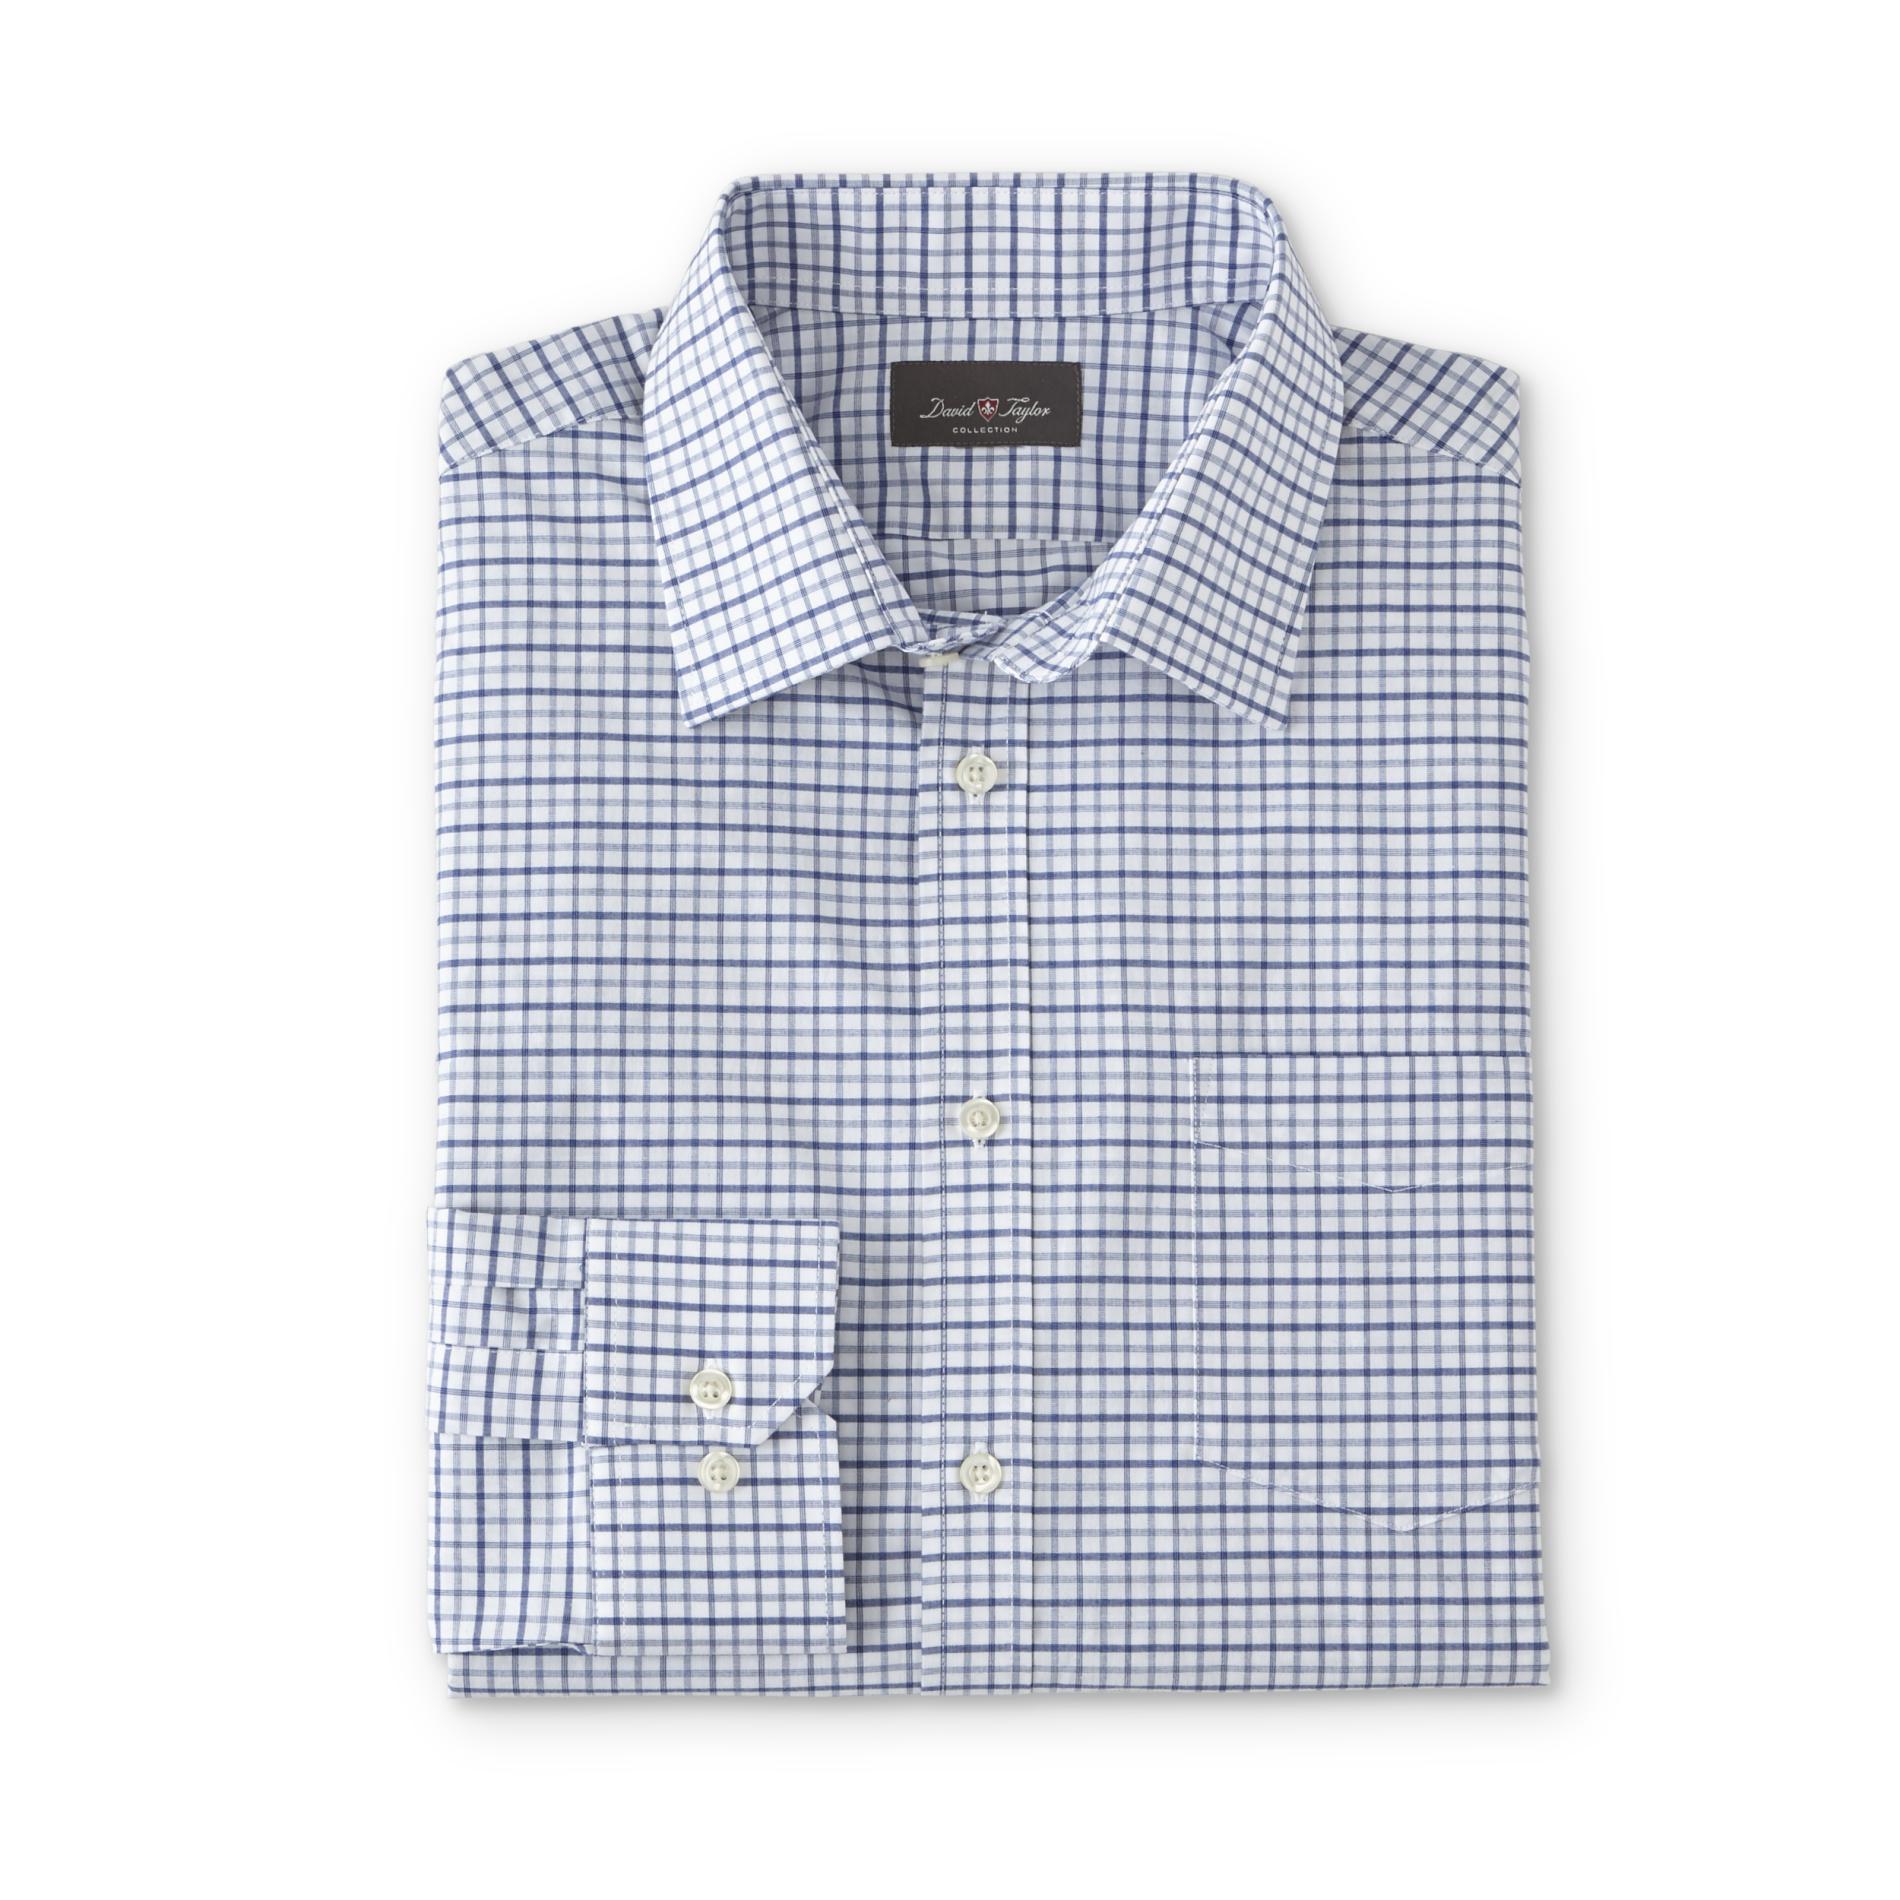 David Taylor Collection Men's Classic Fit Easy Care Stretch Poplin Shirt - Plaid